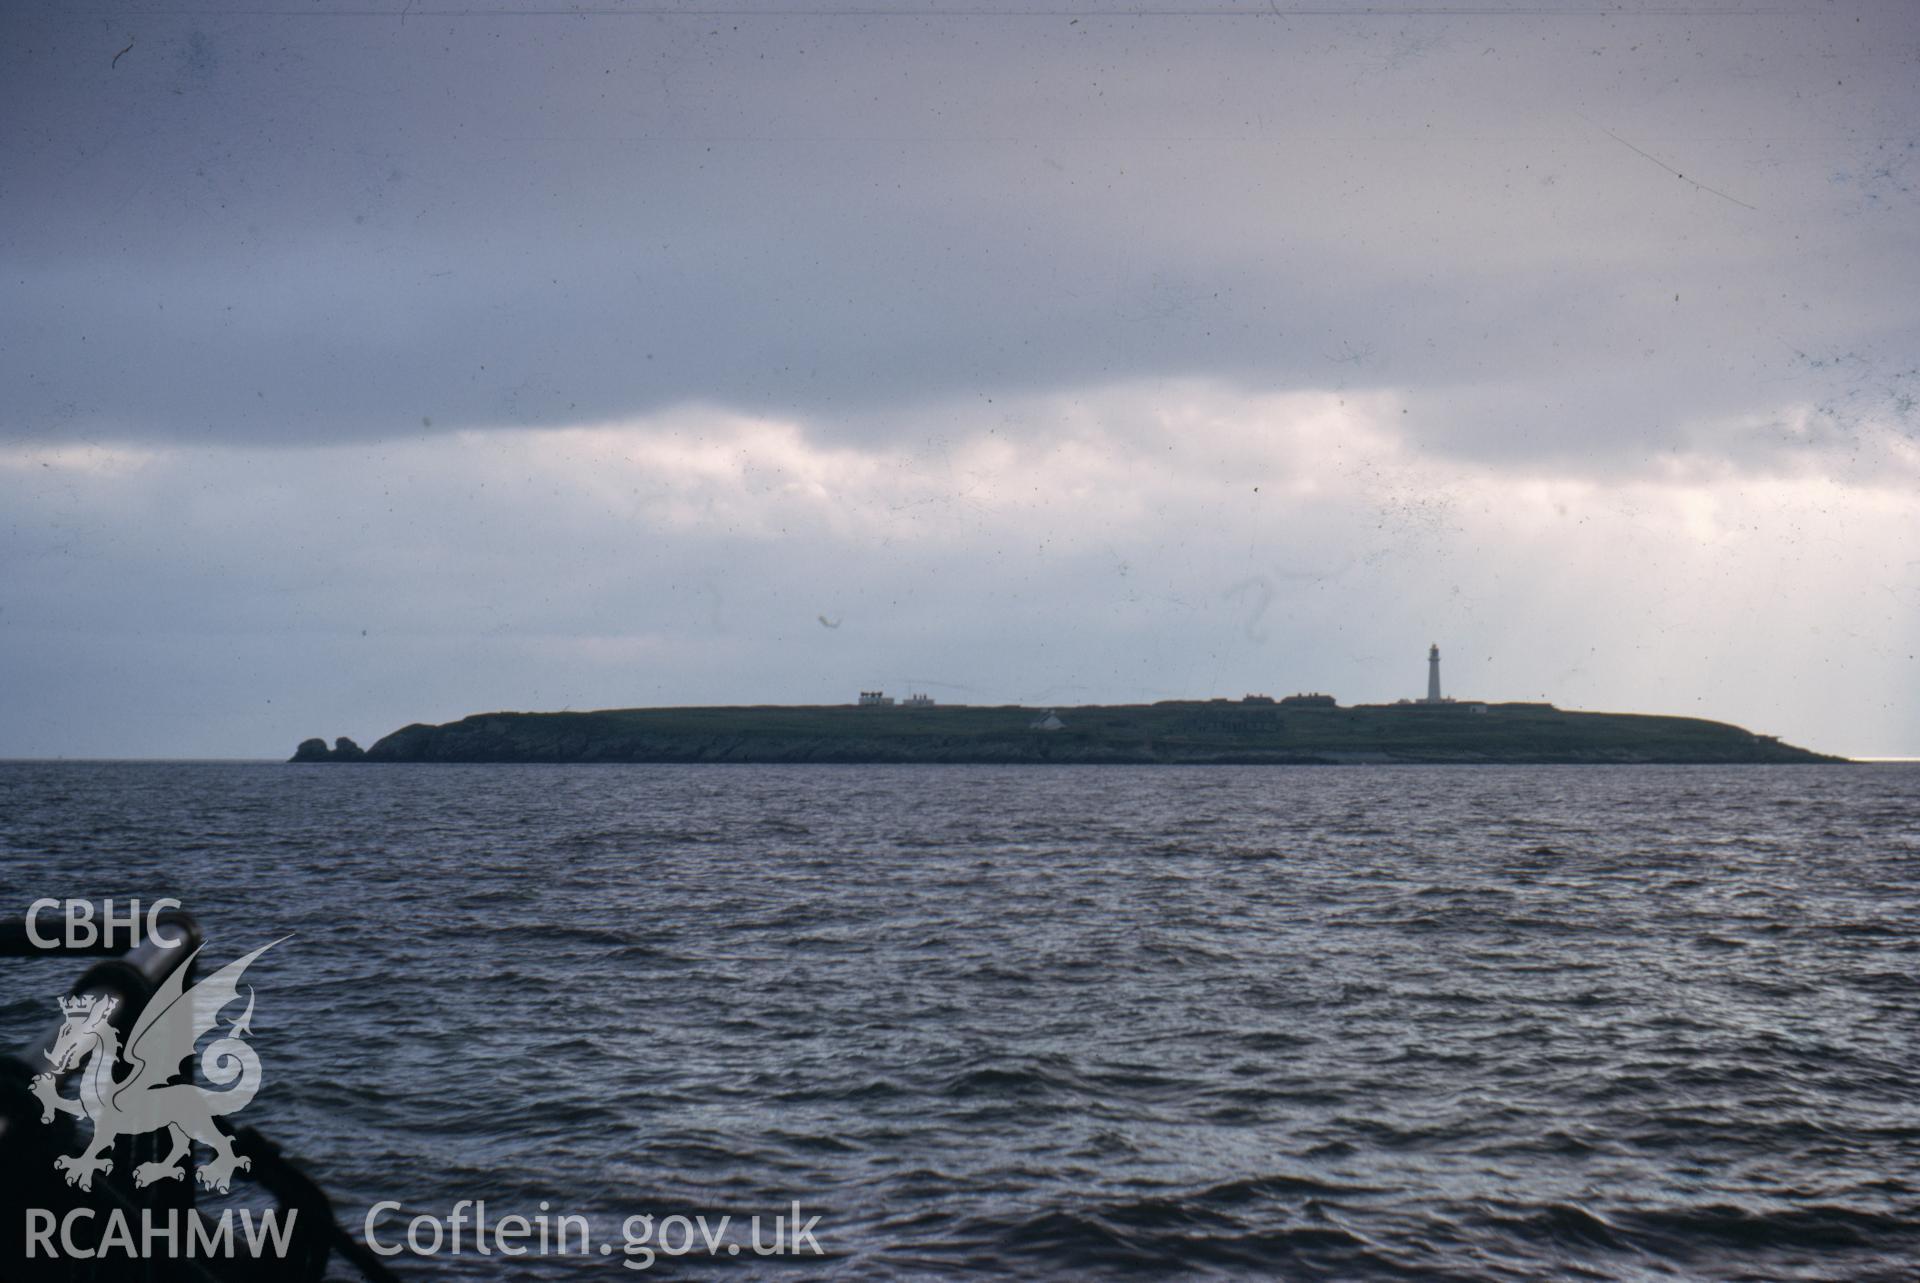 Colour slide showing general view of Flat Holm Island.